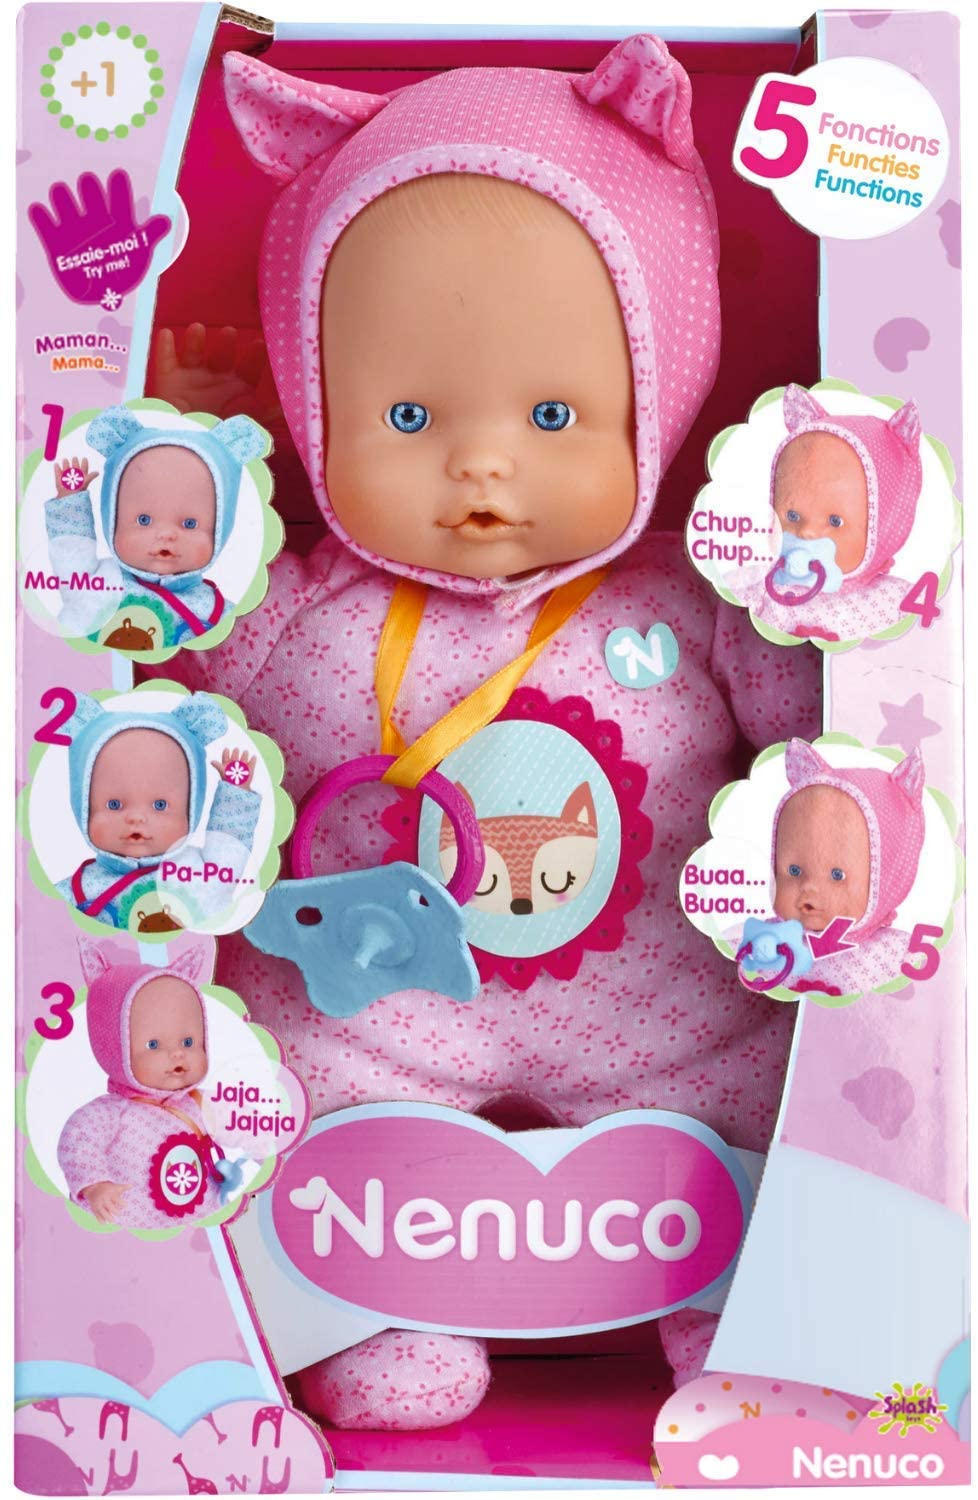 Nenuco - Soft with 5 Functions: Girls